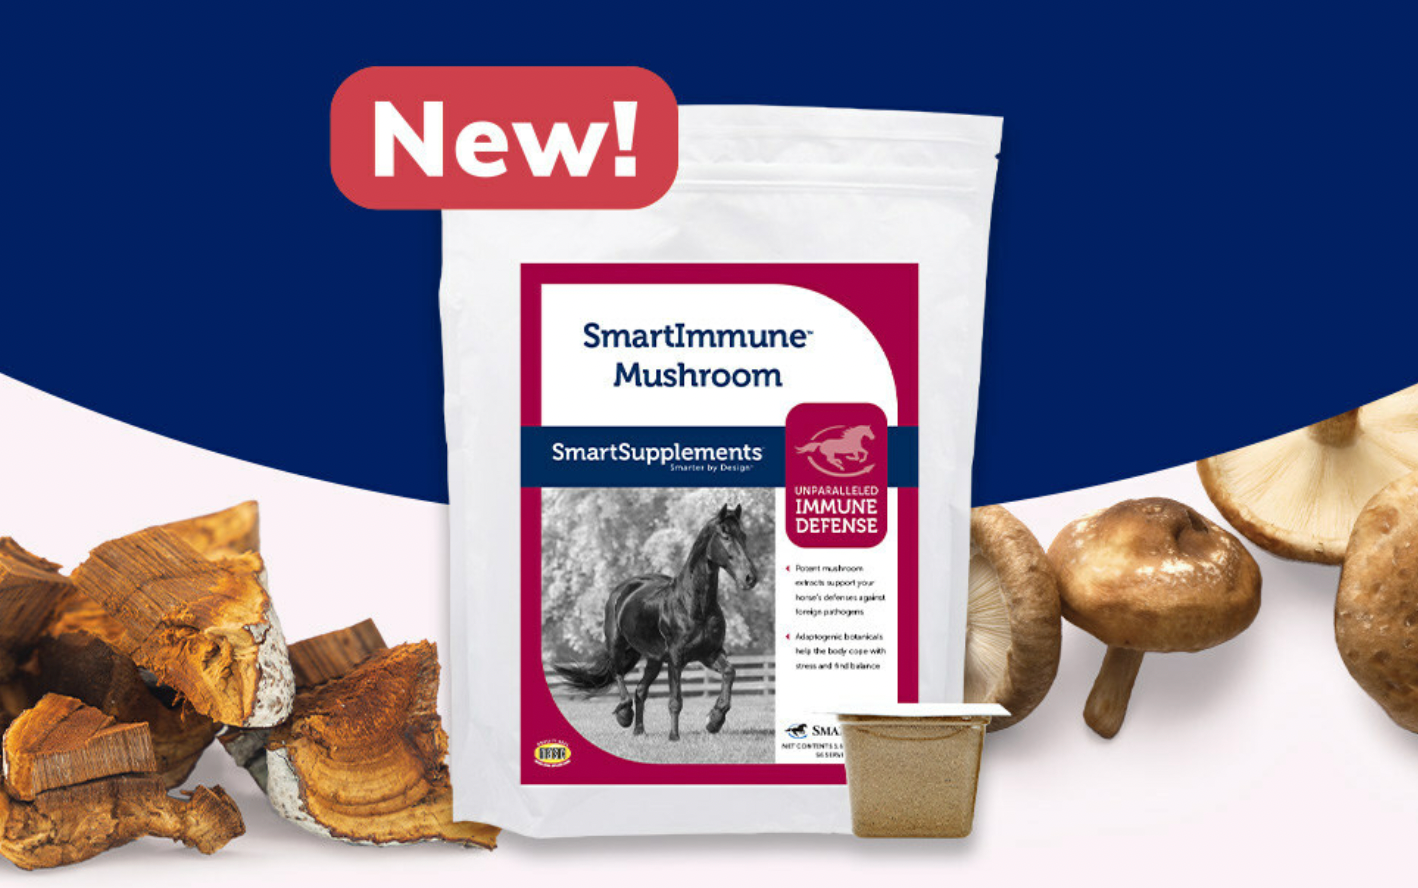 Equine supplement for immune defense in horses is launched